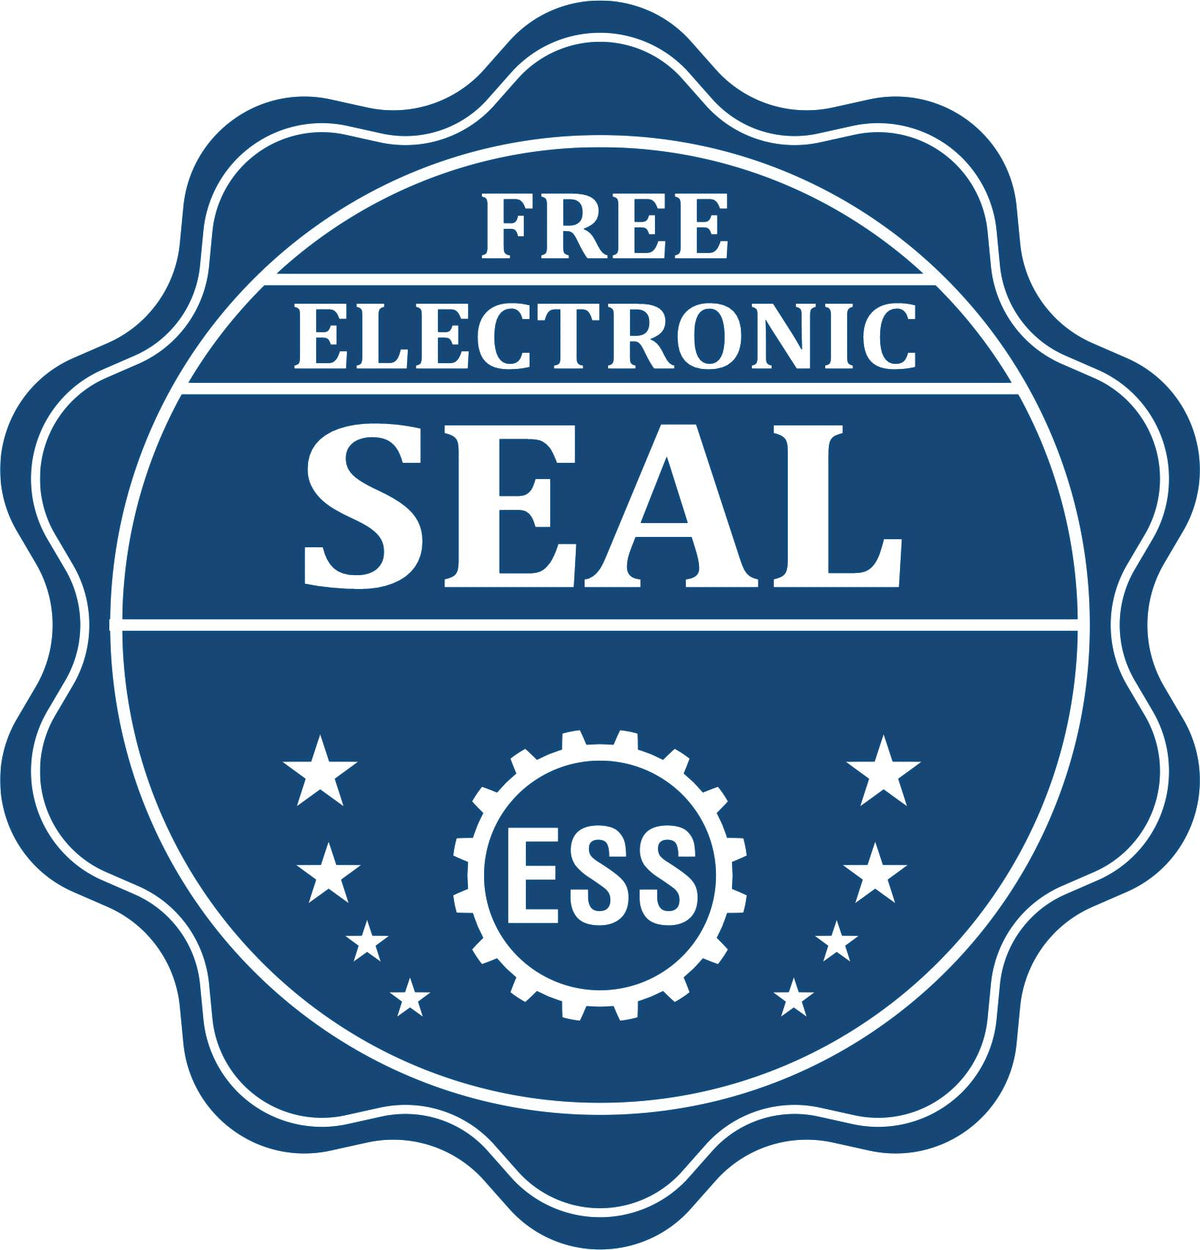 A badge showing a free electronic seal for the Hybrid Illinois Geologist Seal with stars and the ESS gear on the emblem.